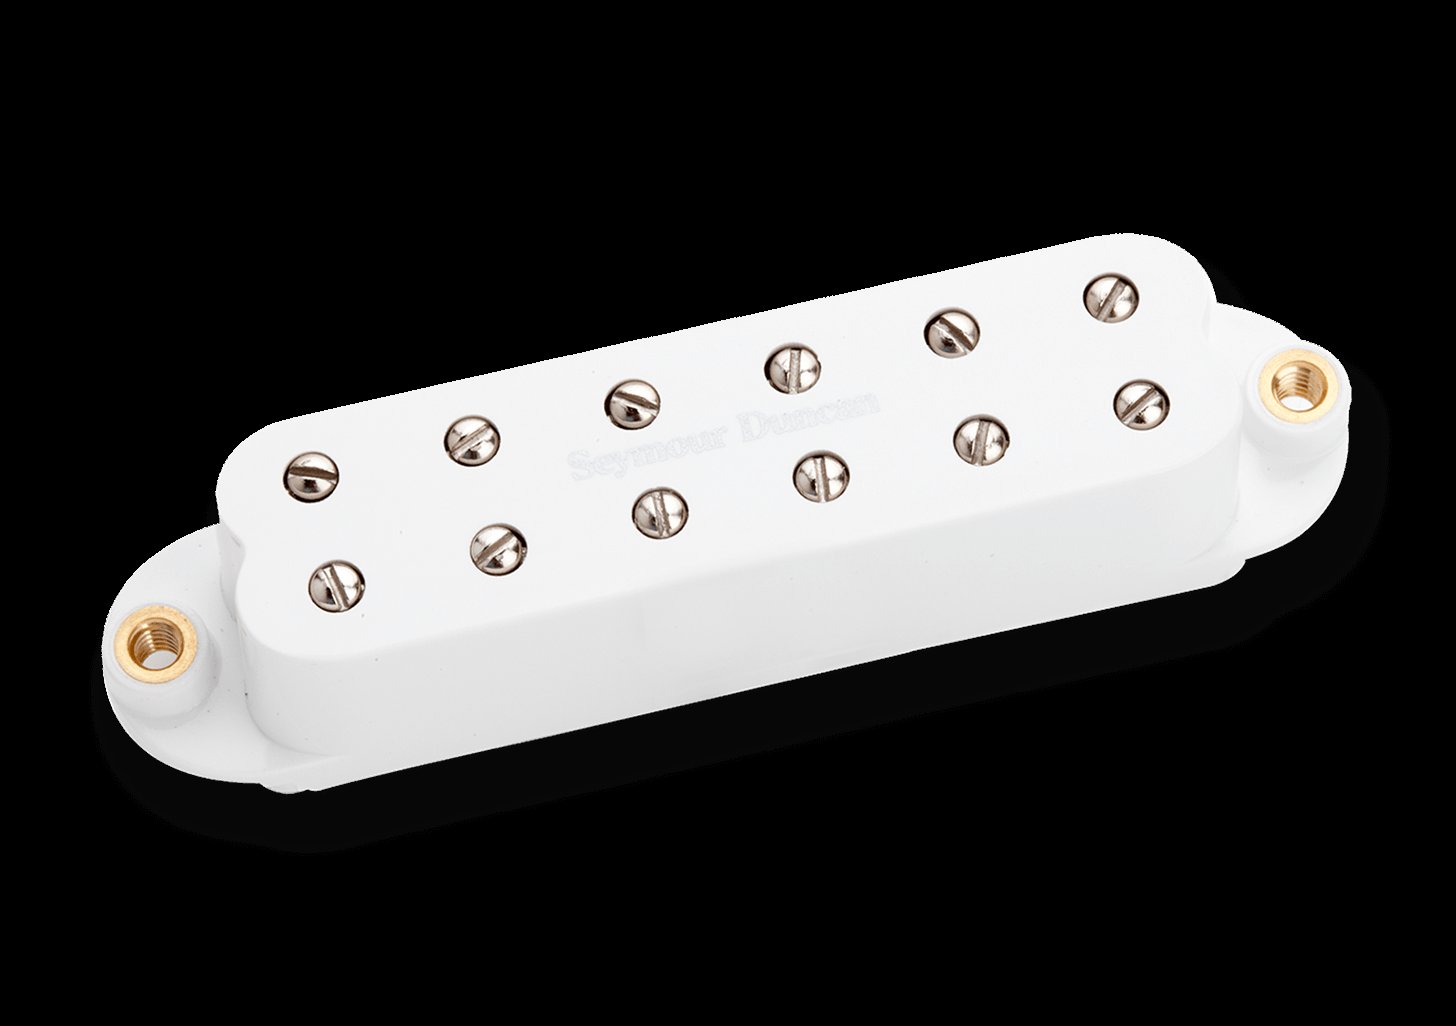 Seymour Duncan Red Devil, Middle Pickup - White